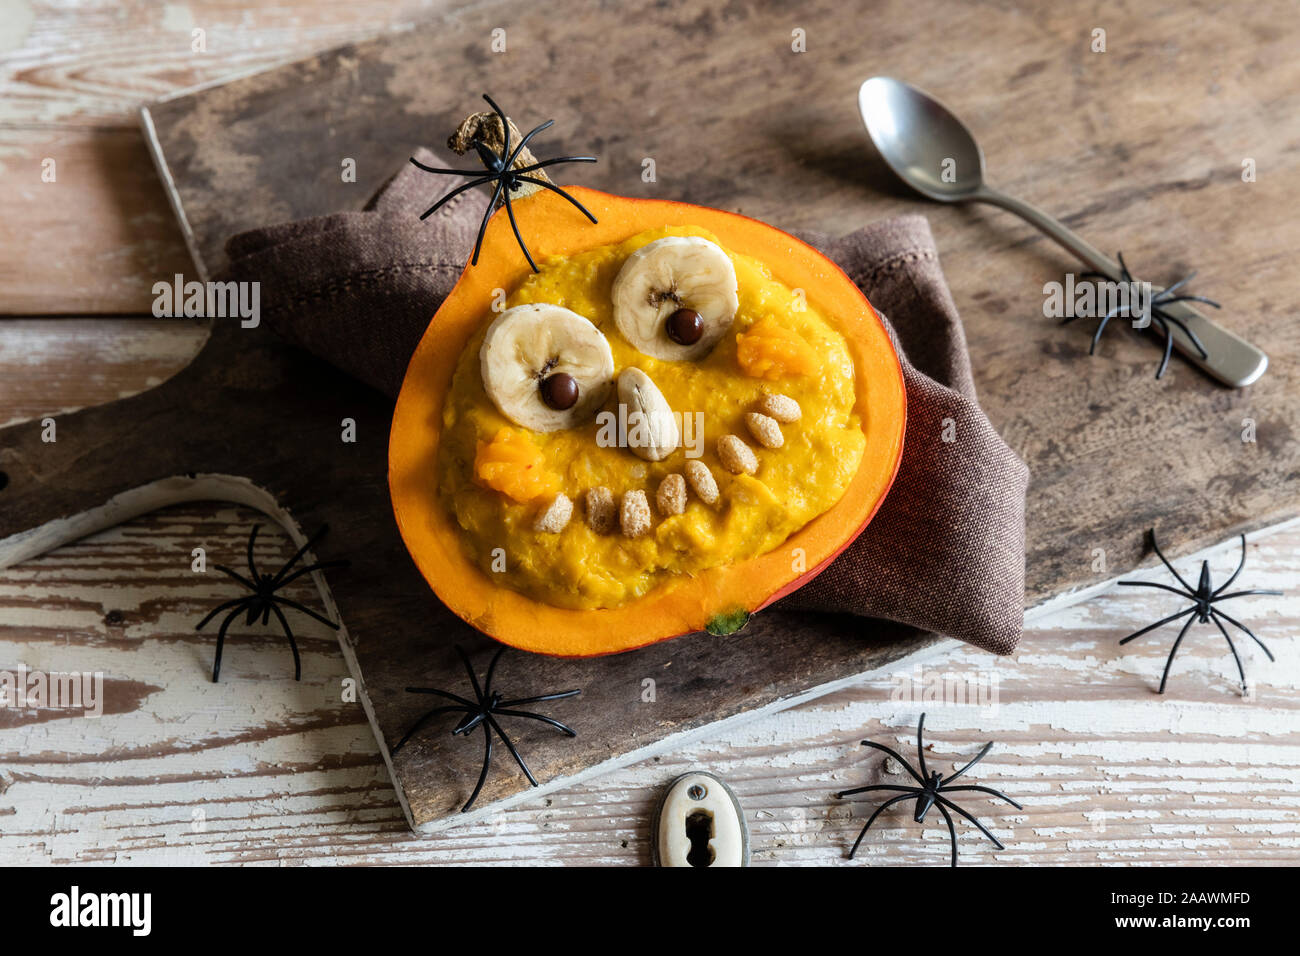 High angle view of pumpkin with anthropomorphic face and decorations on wooden table during Halloween Stock Photo